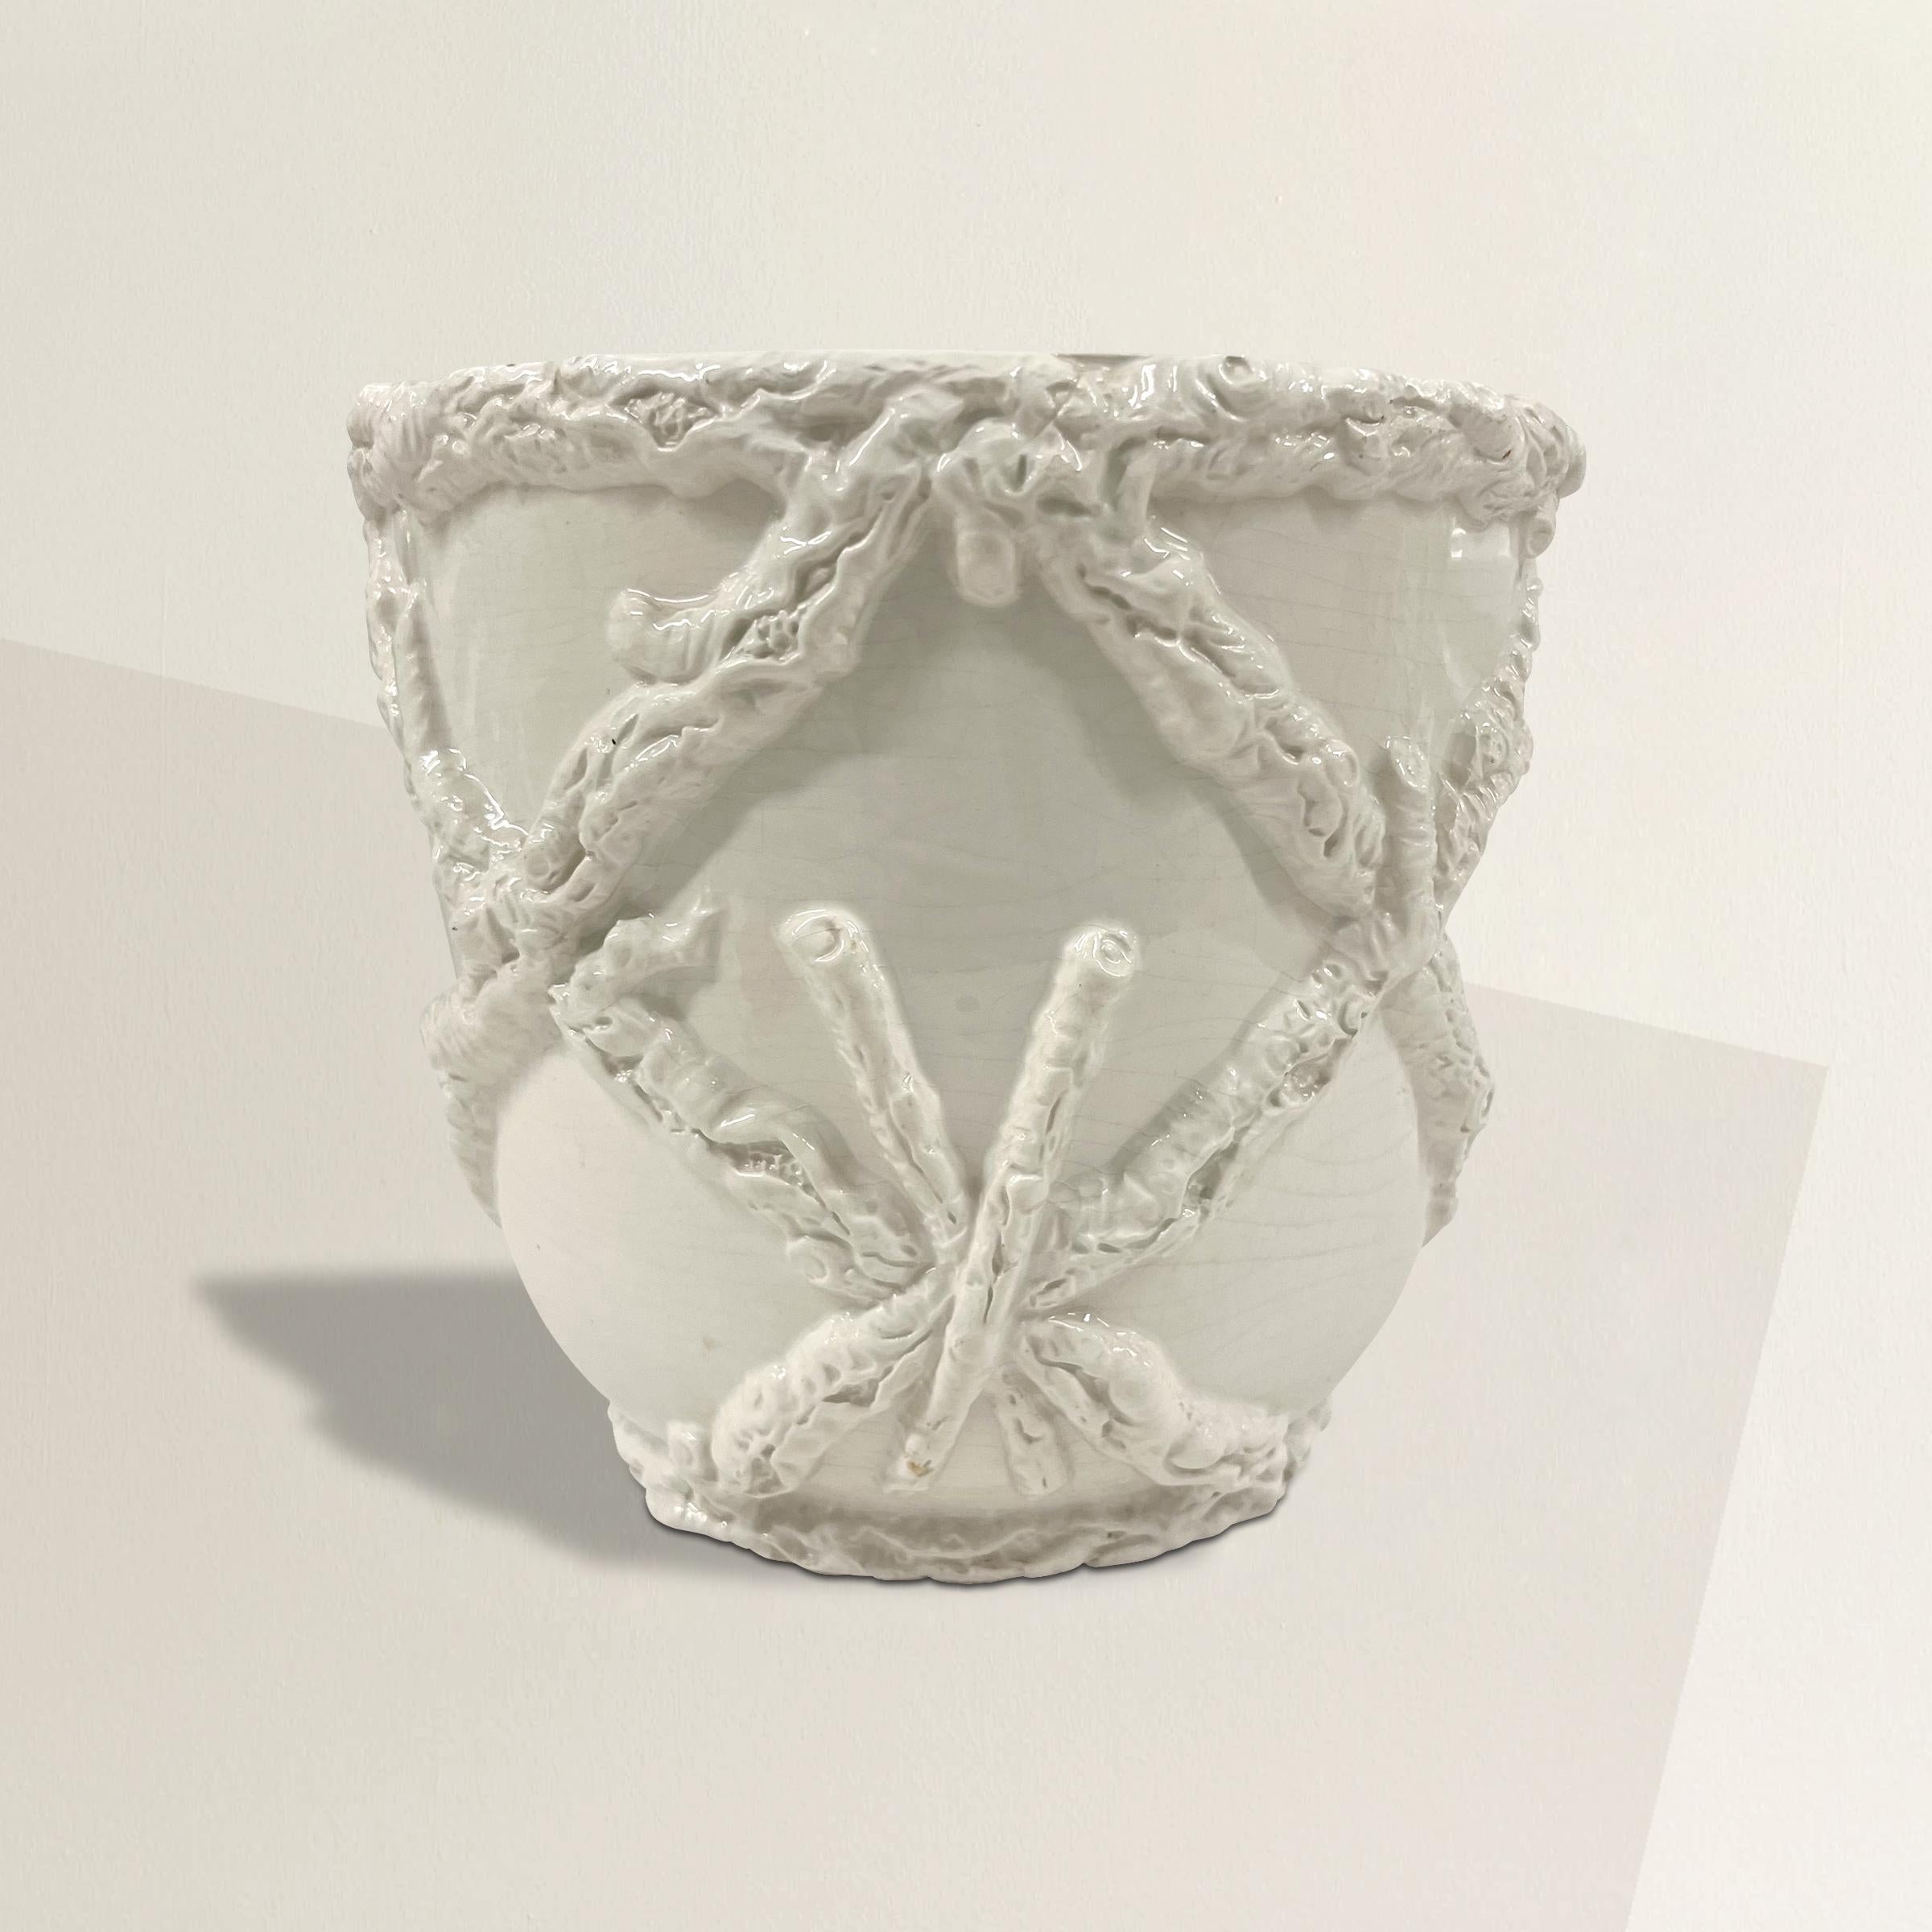 A chic mid-20th century Italian porcelain cachepot with a faux bois design, and finished in a cores crackle glaze. Perfect size for a small houseplant, our tucked next to the sink in your bathroom or powder room and used as a garbage bin.